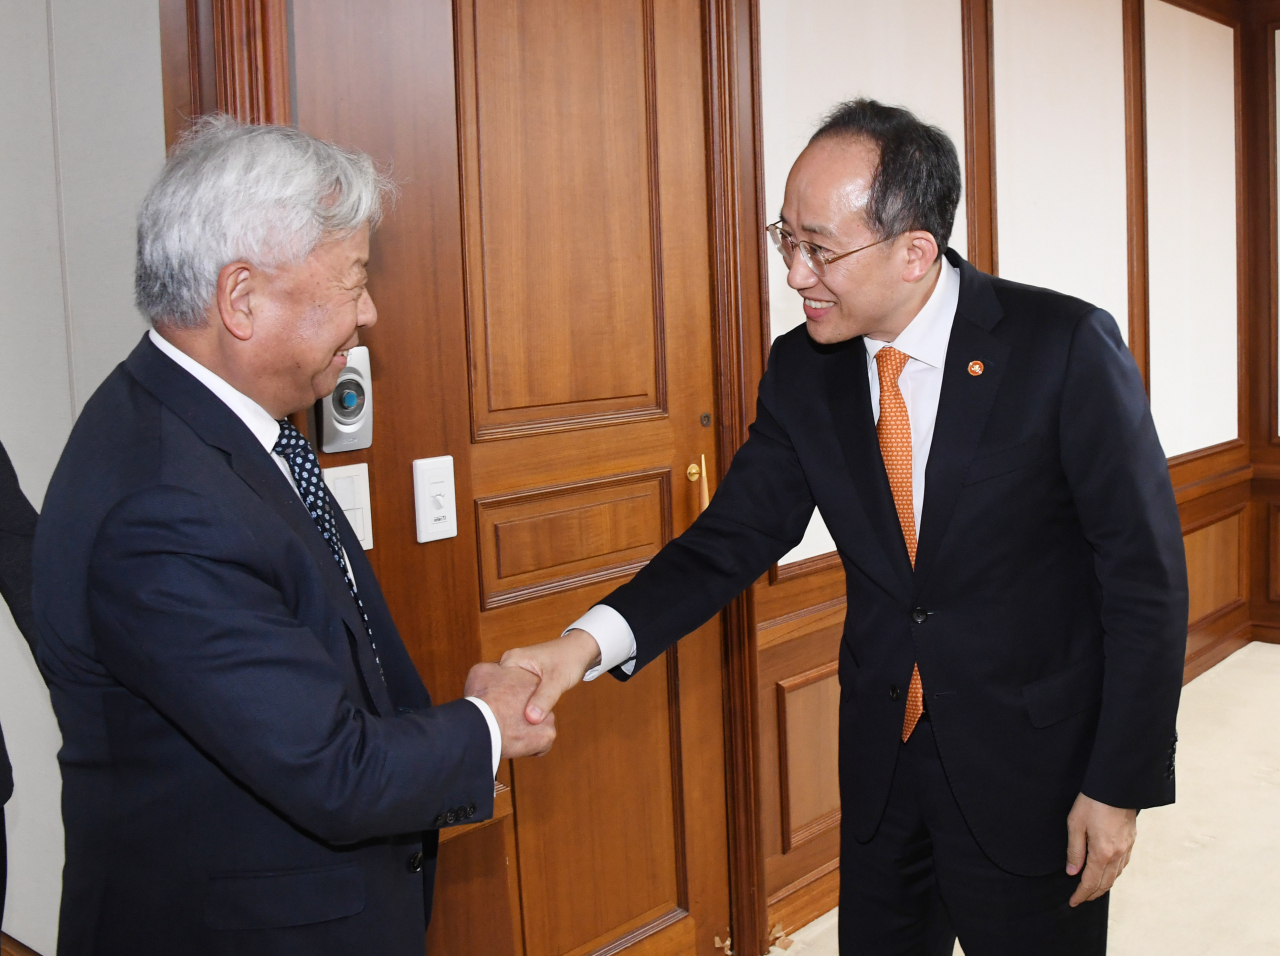 Finance Minister Choo Kyung-ho (right) shakes hands with AIIB President Jin Liqun ahead of their meeting held in Seoul on Monday. (Yonhap)